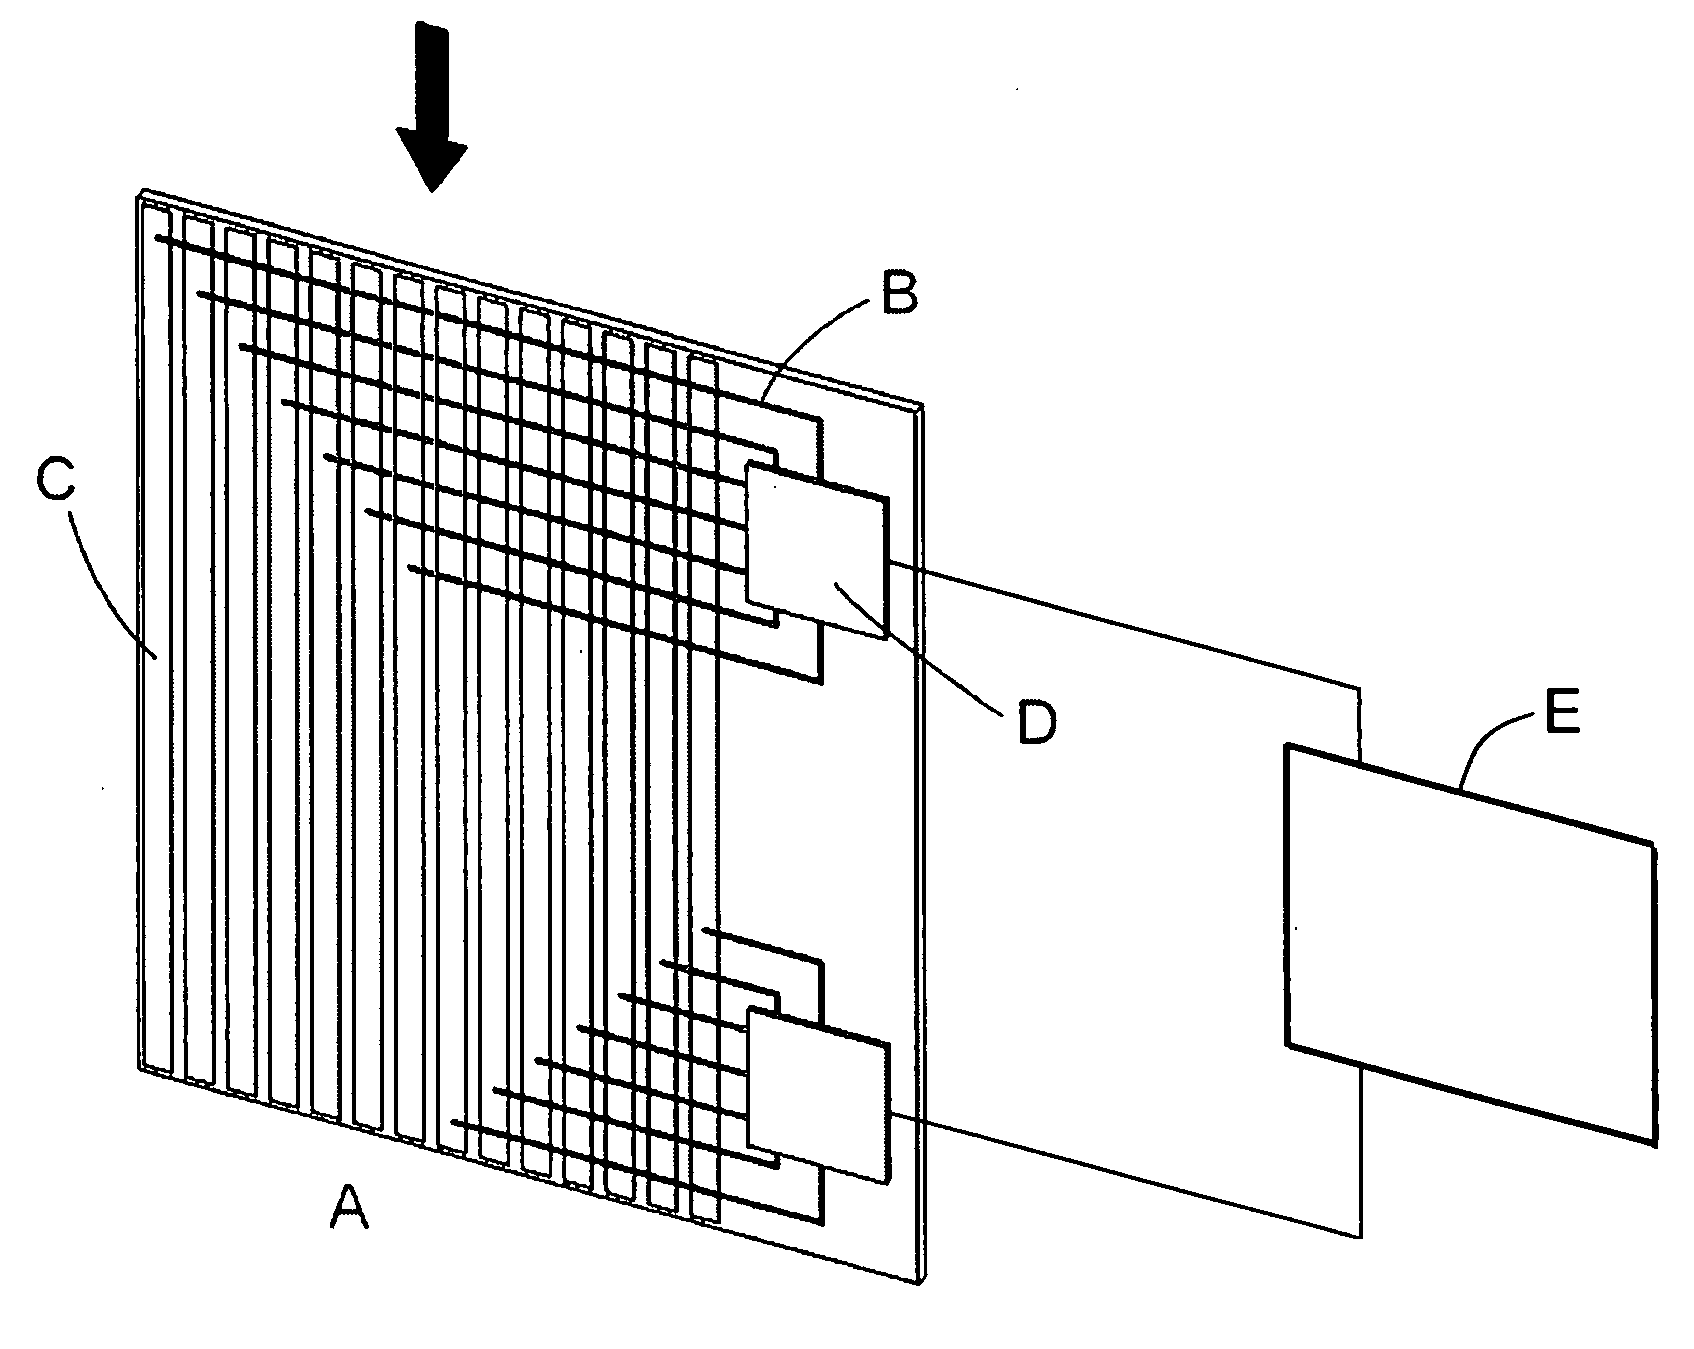 Silicon detector assembly for x-ray imaging